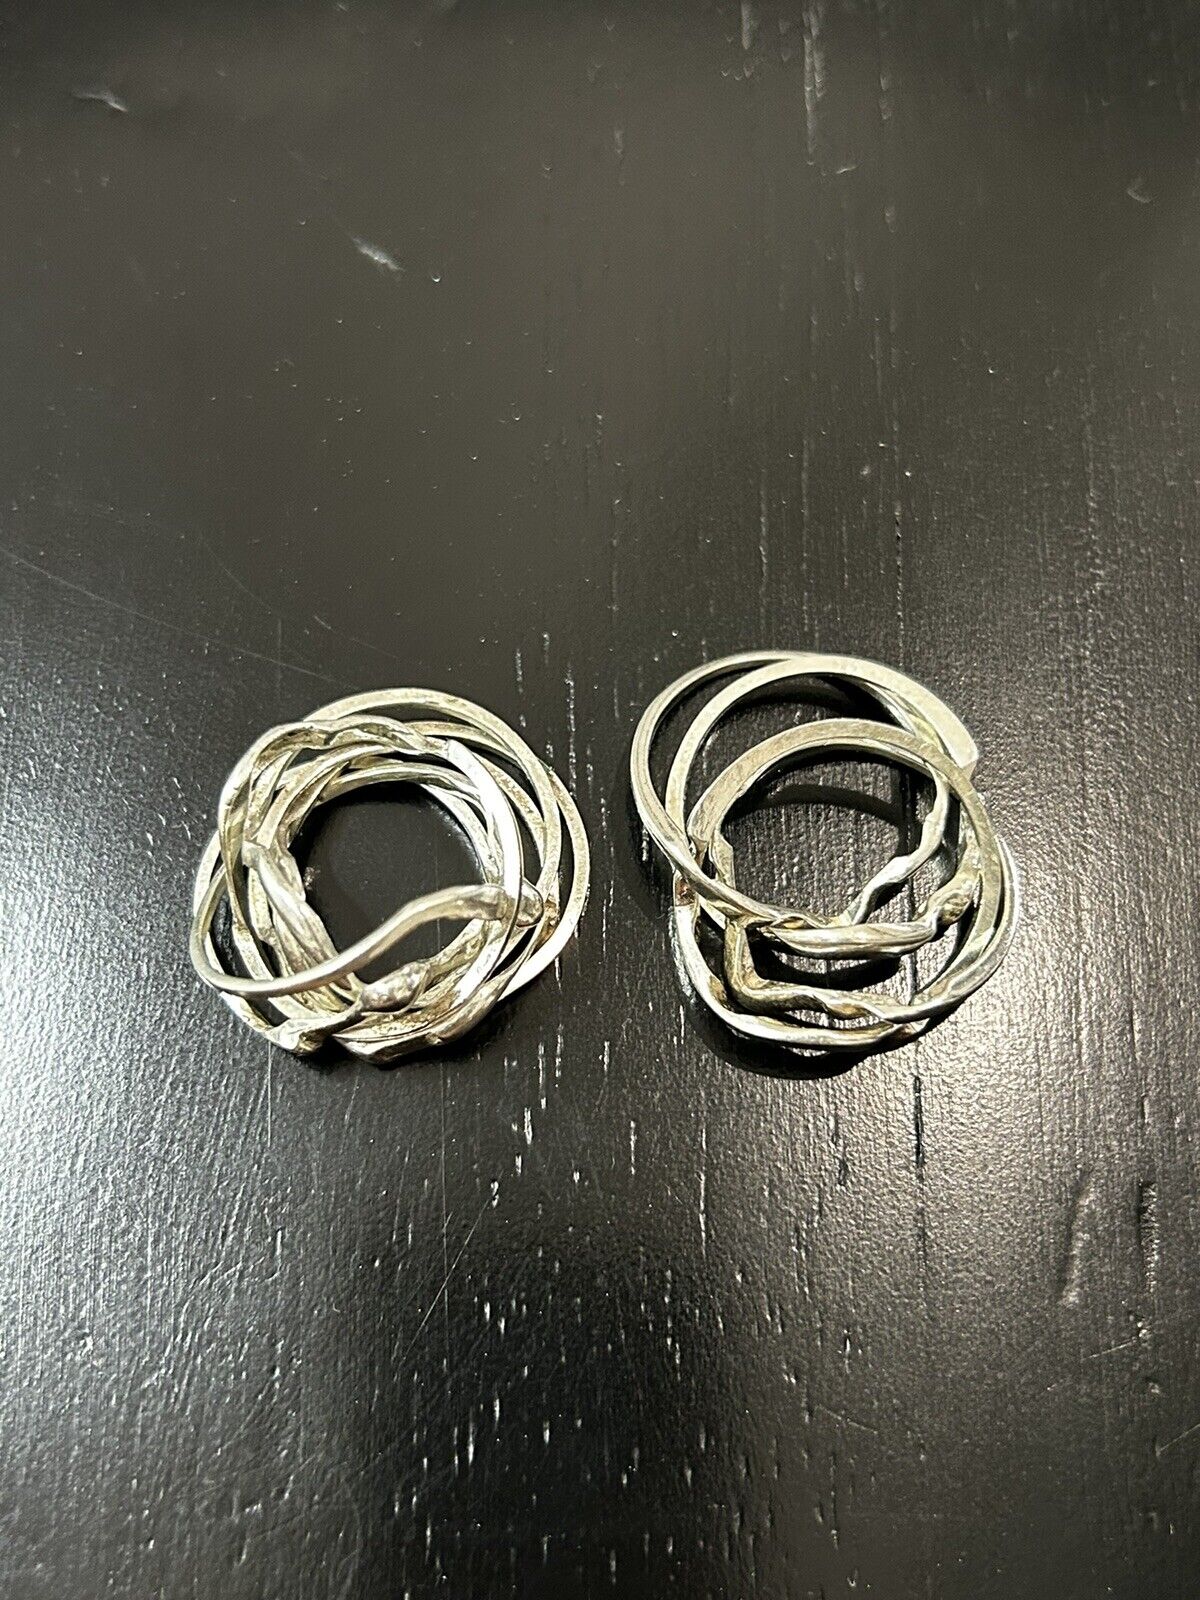 2 Vintage Sterling Silver 6 & 4 Piece Puzzle Ring Wire Wrapped Handmade Size 9